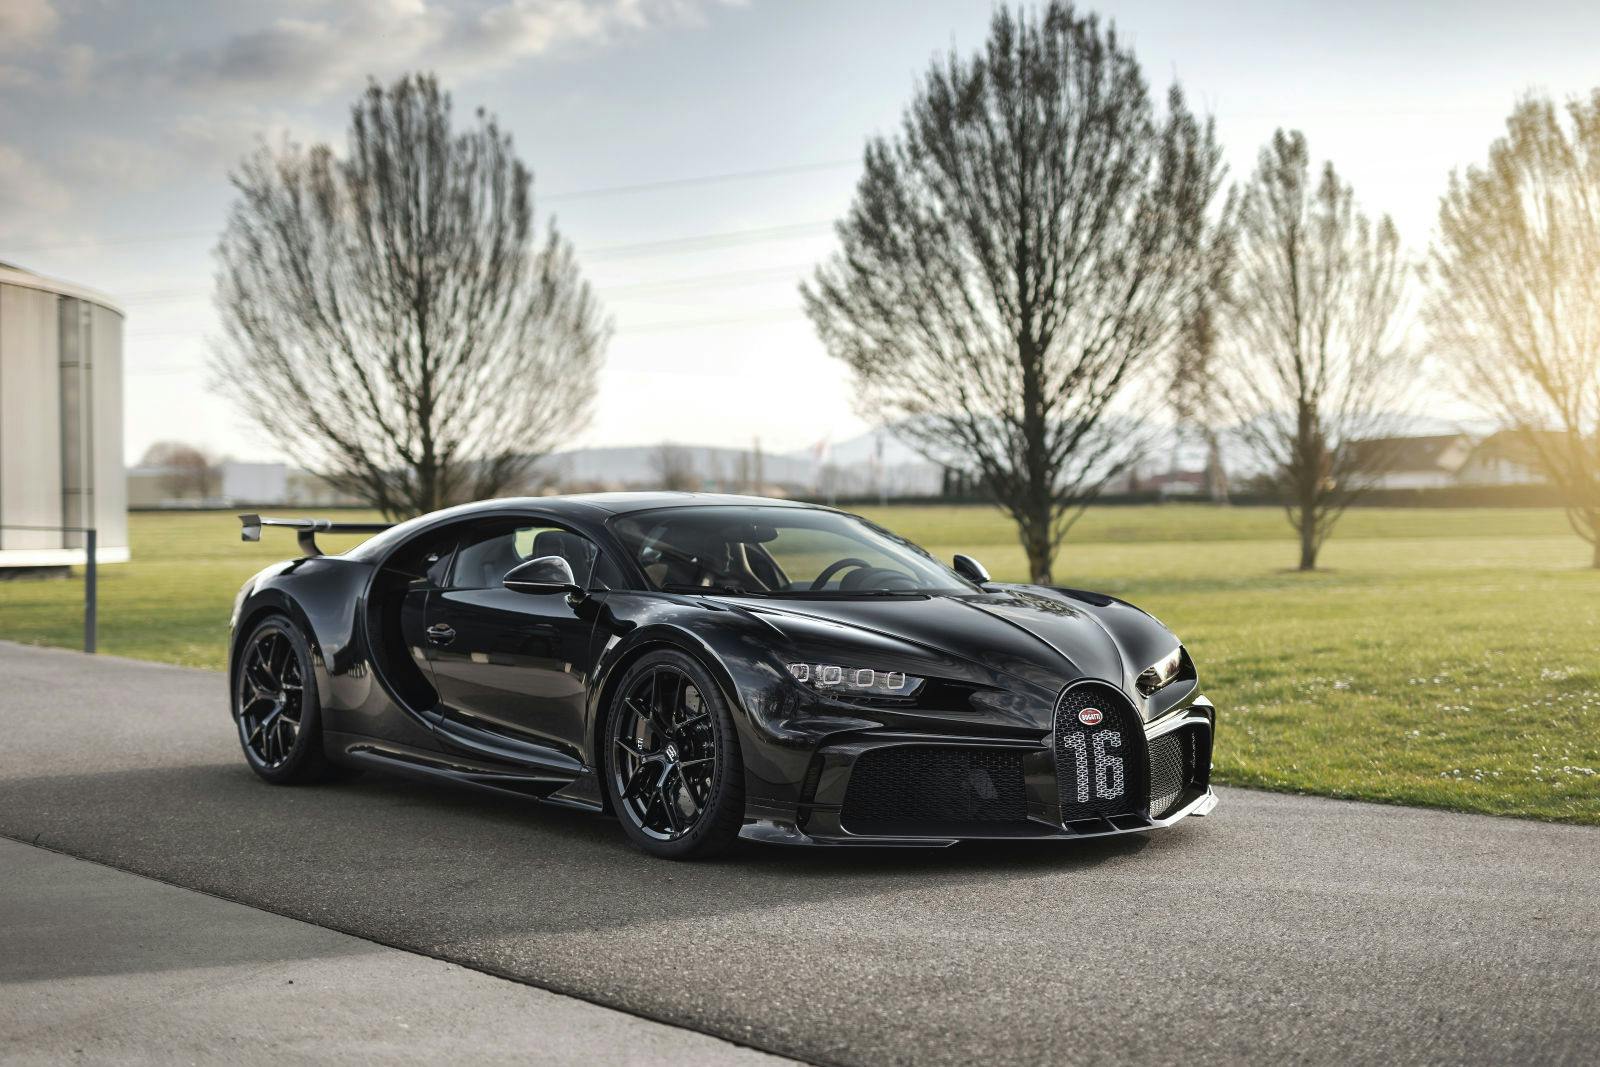 The 300th Chiron, a Bugatti Chiron Pur Sport, leaves the Atelier in Molsheim.